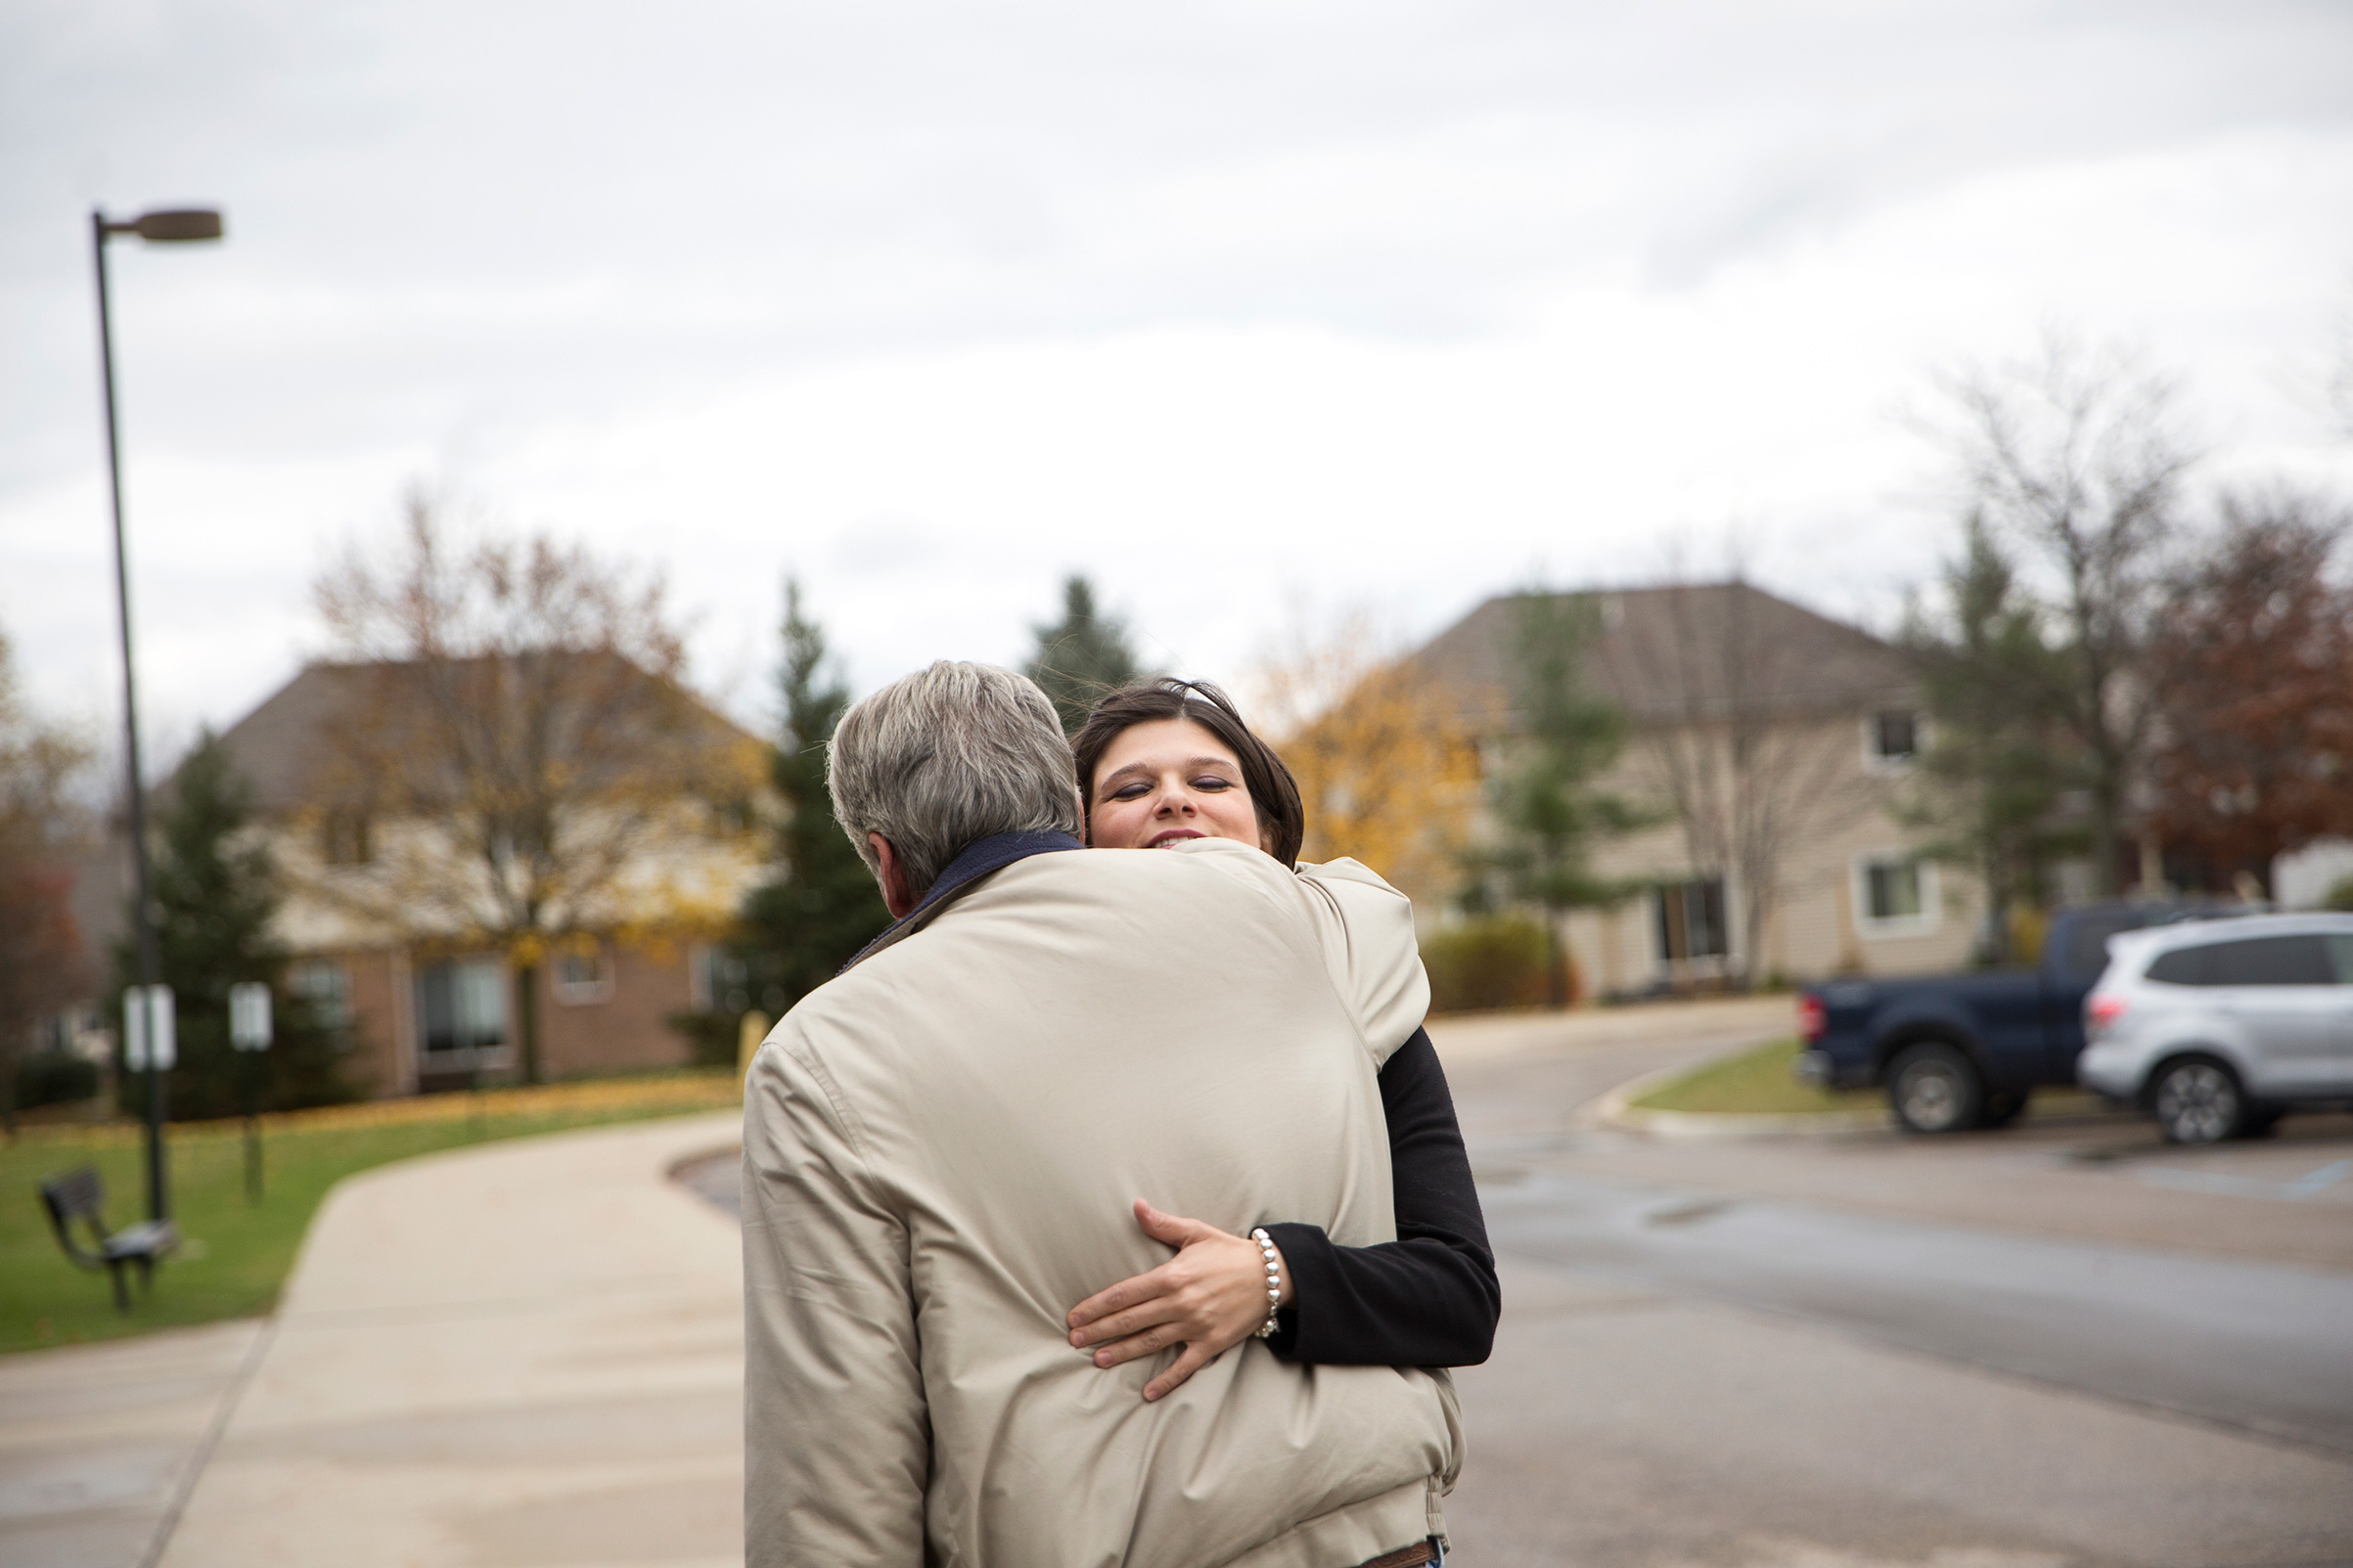 Democratic candidate for Michigan's 11th Congressional District Haley Stevens hugs her neighbor after running into him while voting at Deerfield Elementary School in Rochester Hills, Mich, on Tuesday, Nov. 6, 2018. (Erin Kirkland for TIME)